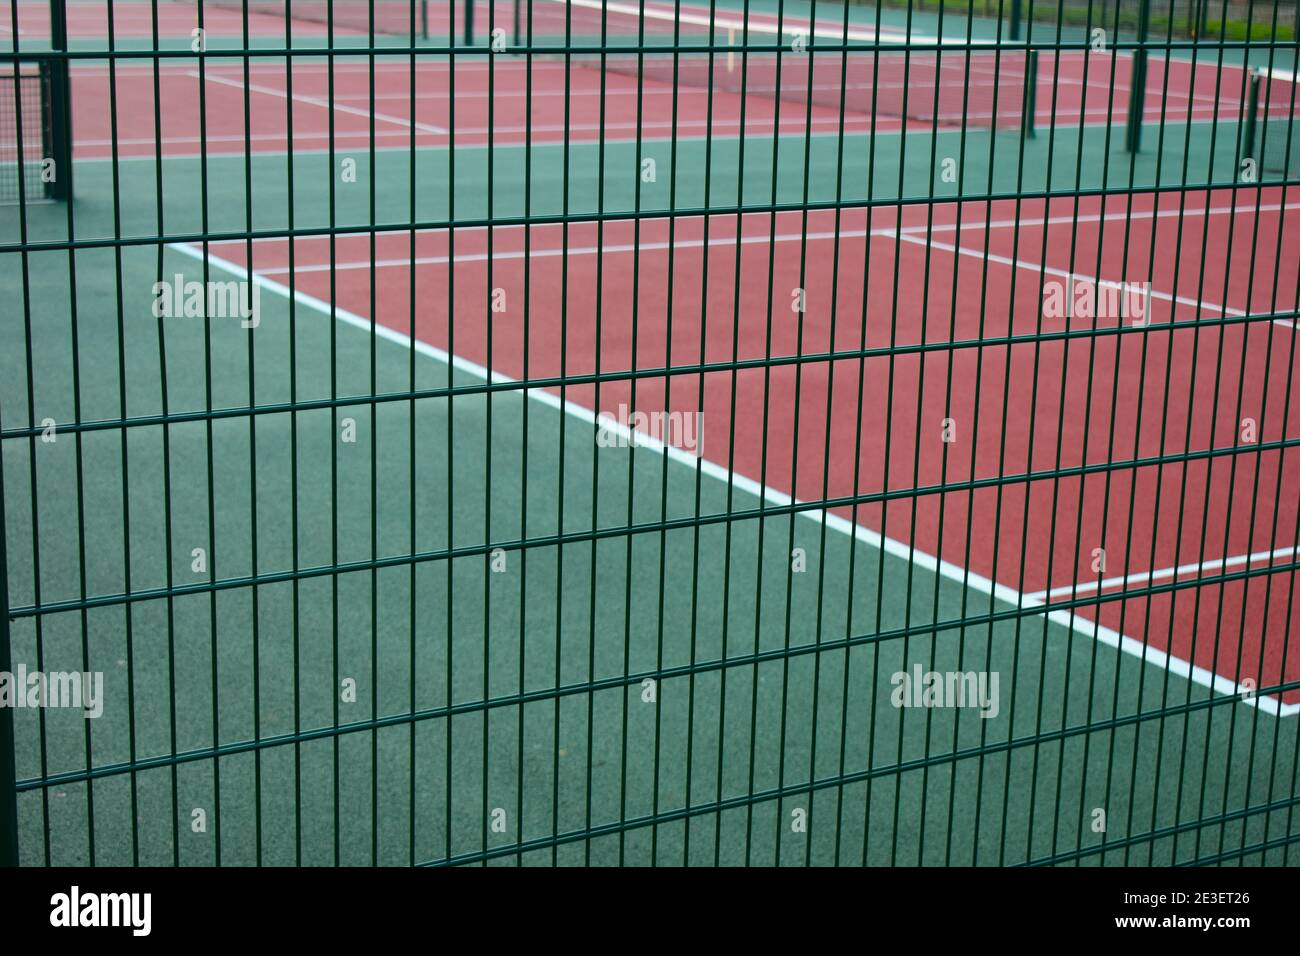 Hard tennis court is common surface for professional play It is easy maintenance best bounce allows offensive or defensive players to prove successful Stock Photo